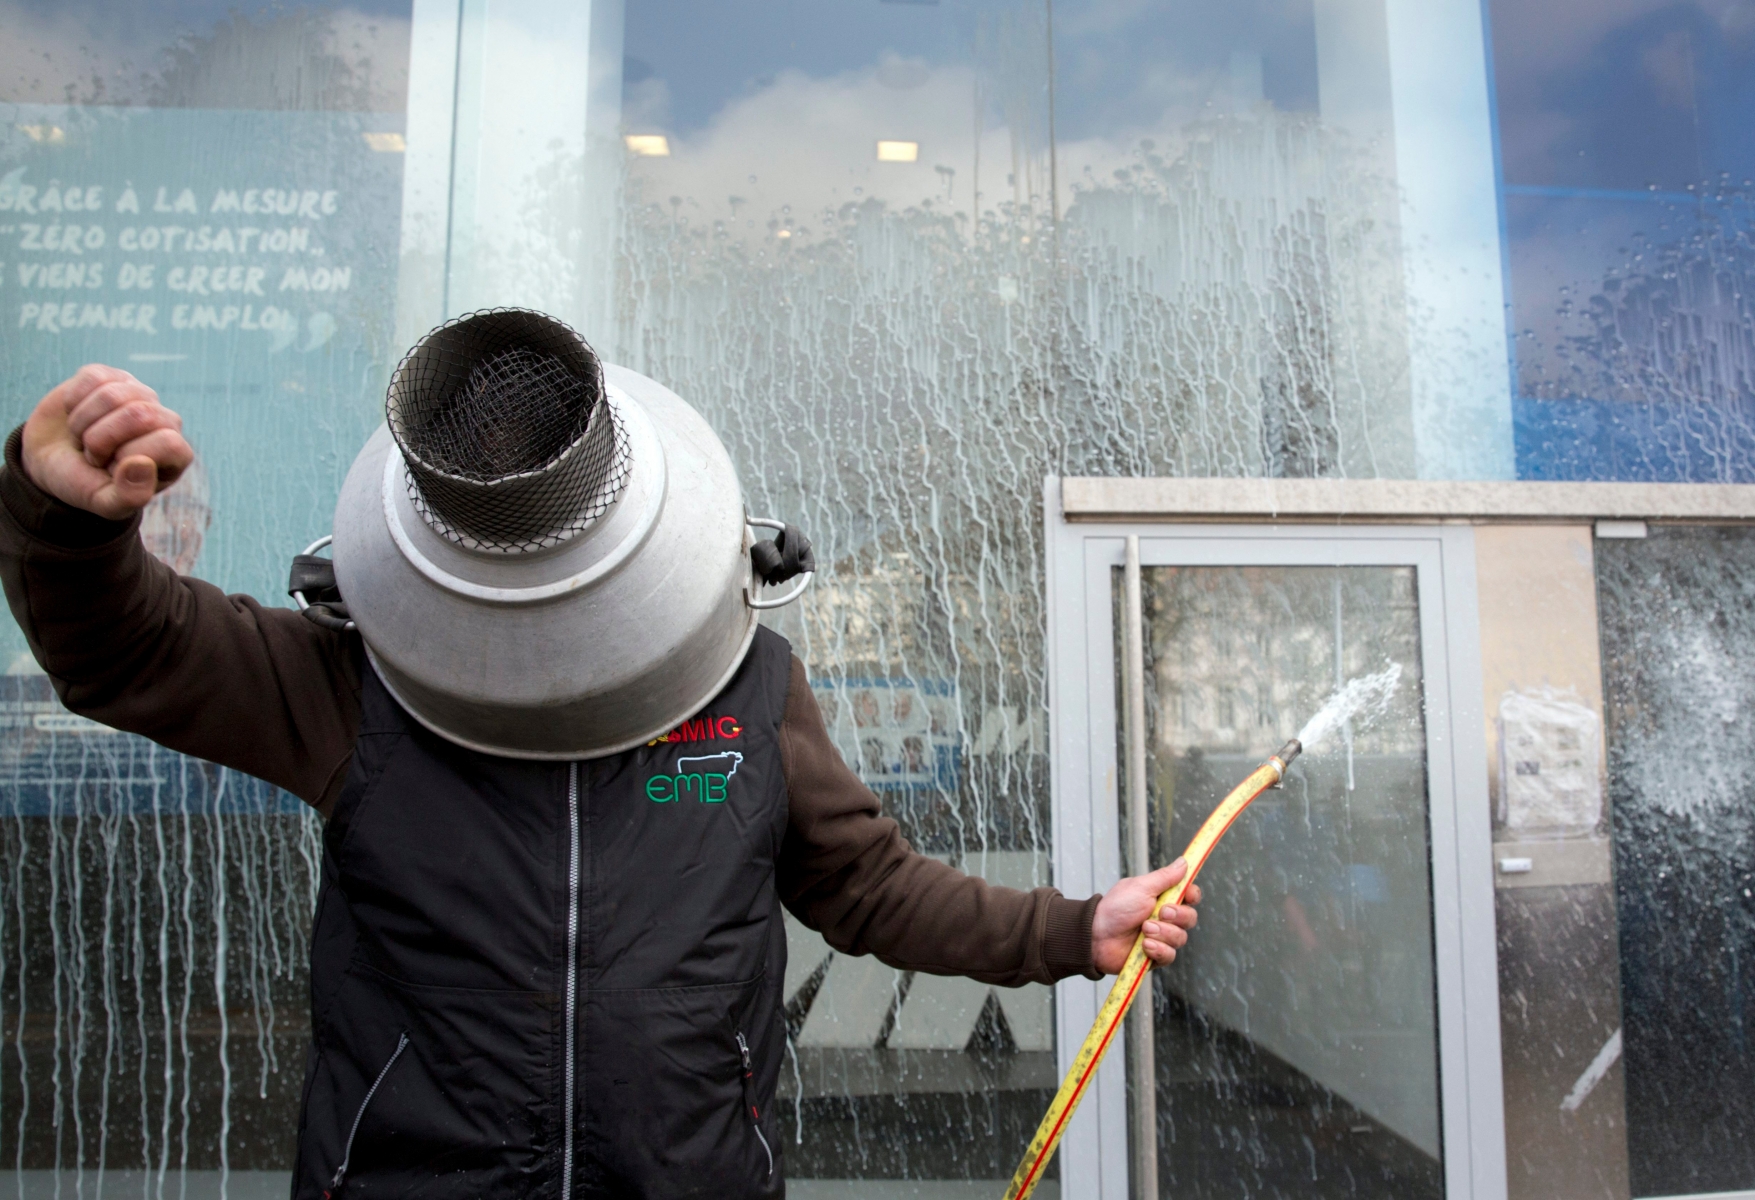 A farmer sprays milk outside the MR political headquarters during a demonstration in Brussels on Monday, March 14, 2016. Farmers demonstrated in Brussels Monday against falling food prices. Sign reads in French 'engaged for the future'. (AP Photo/Thierry Monasse) Belgium EU Farmers demonstration